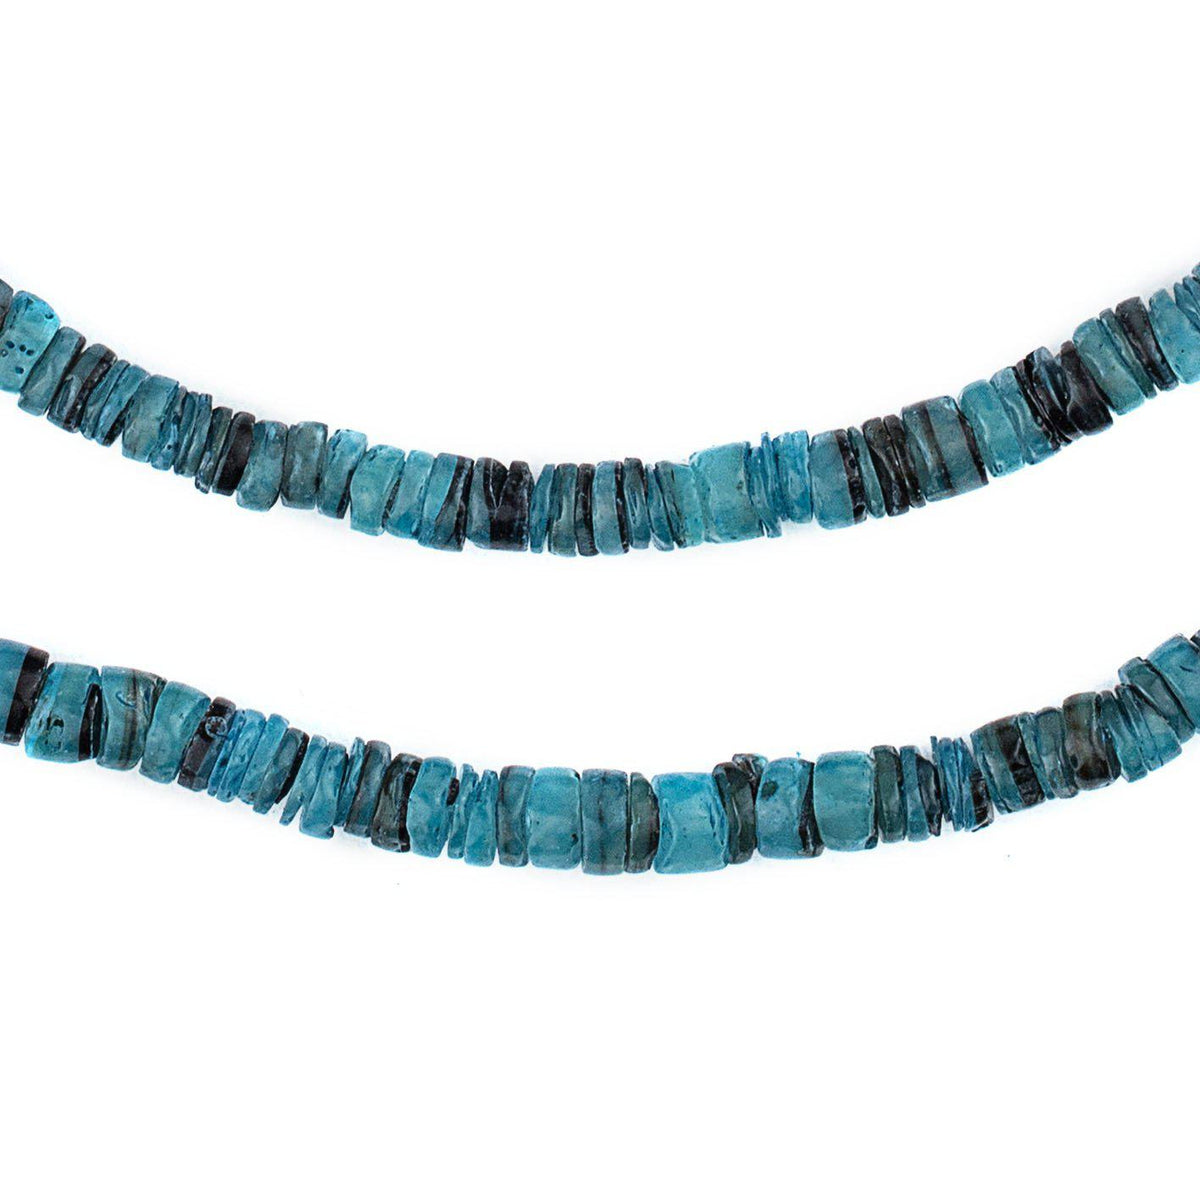 Blue Dyed Shell Beads, 6mm Beads, Strand of Shell Beads, Jewelry